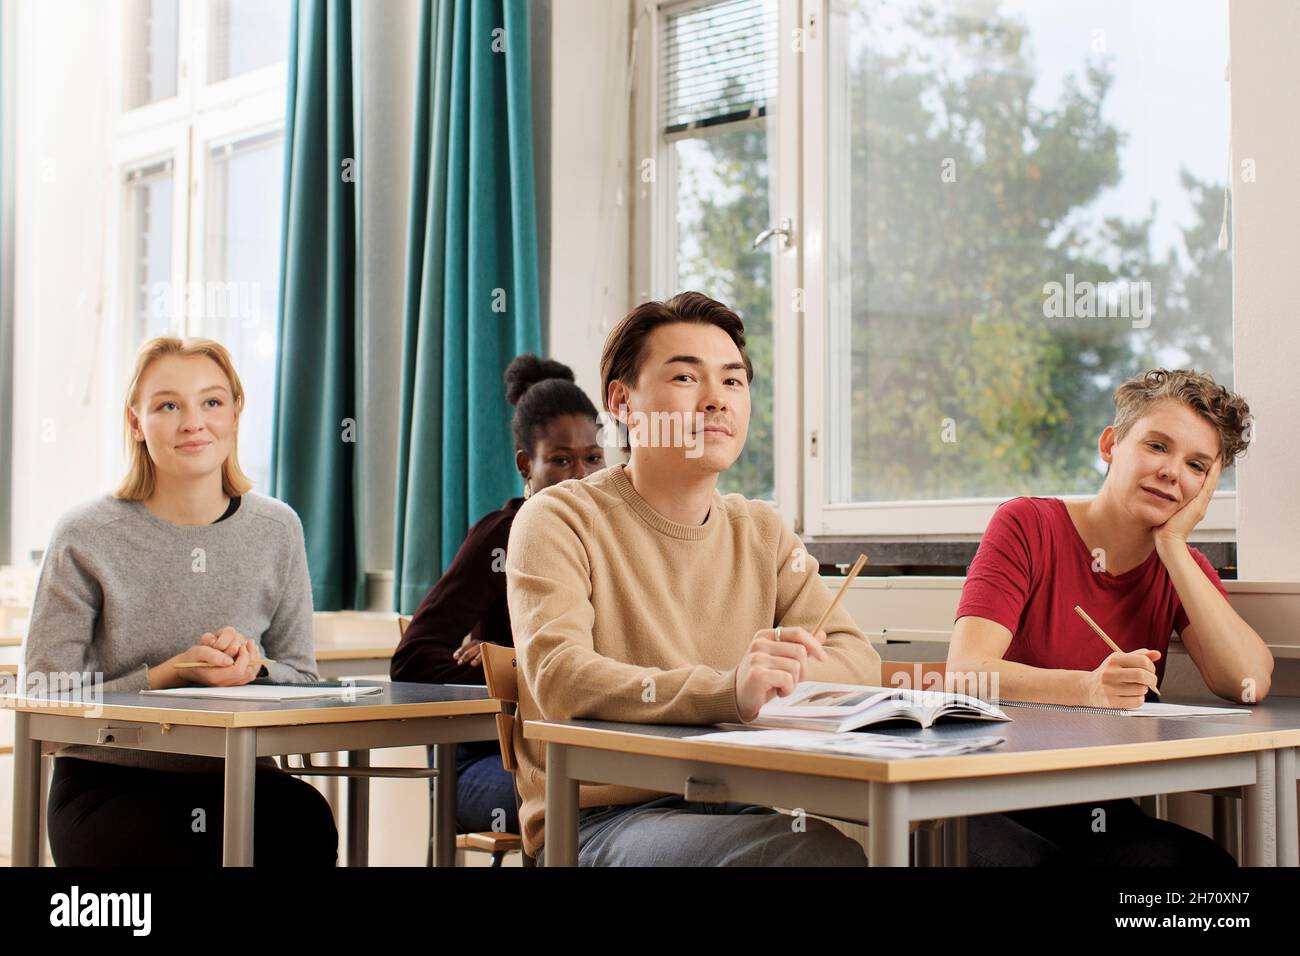 Smiling students in classroom Stock Photo